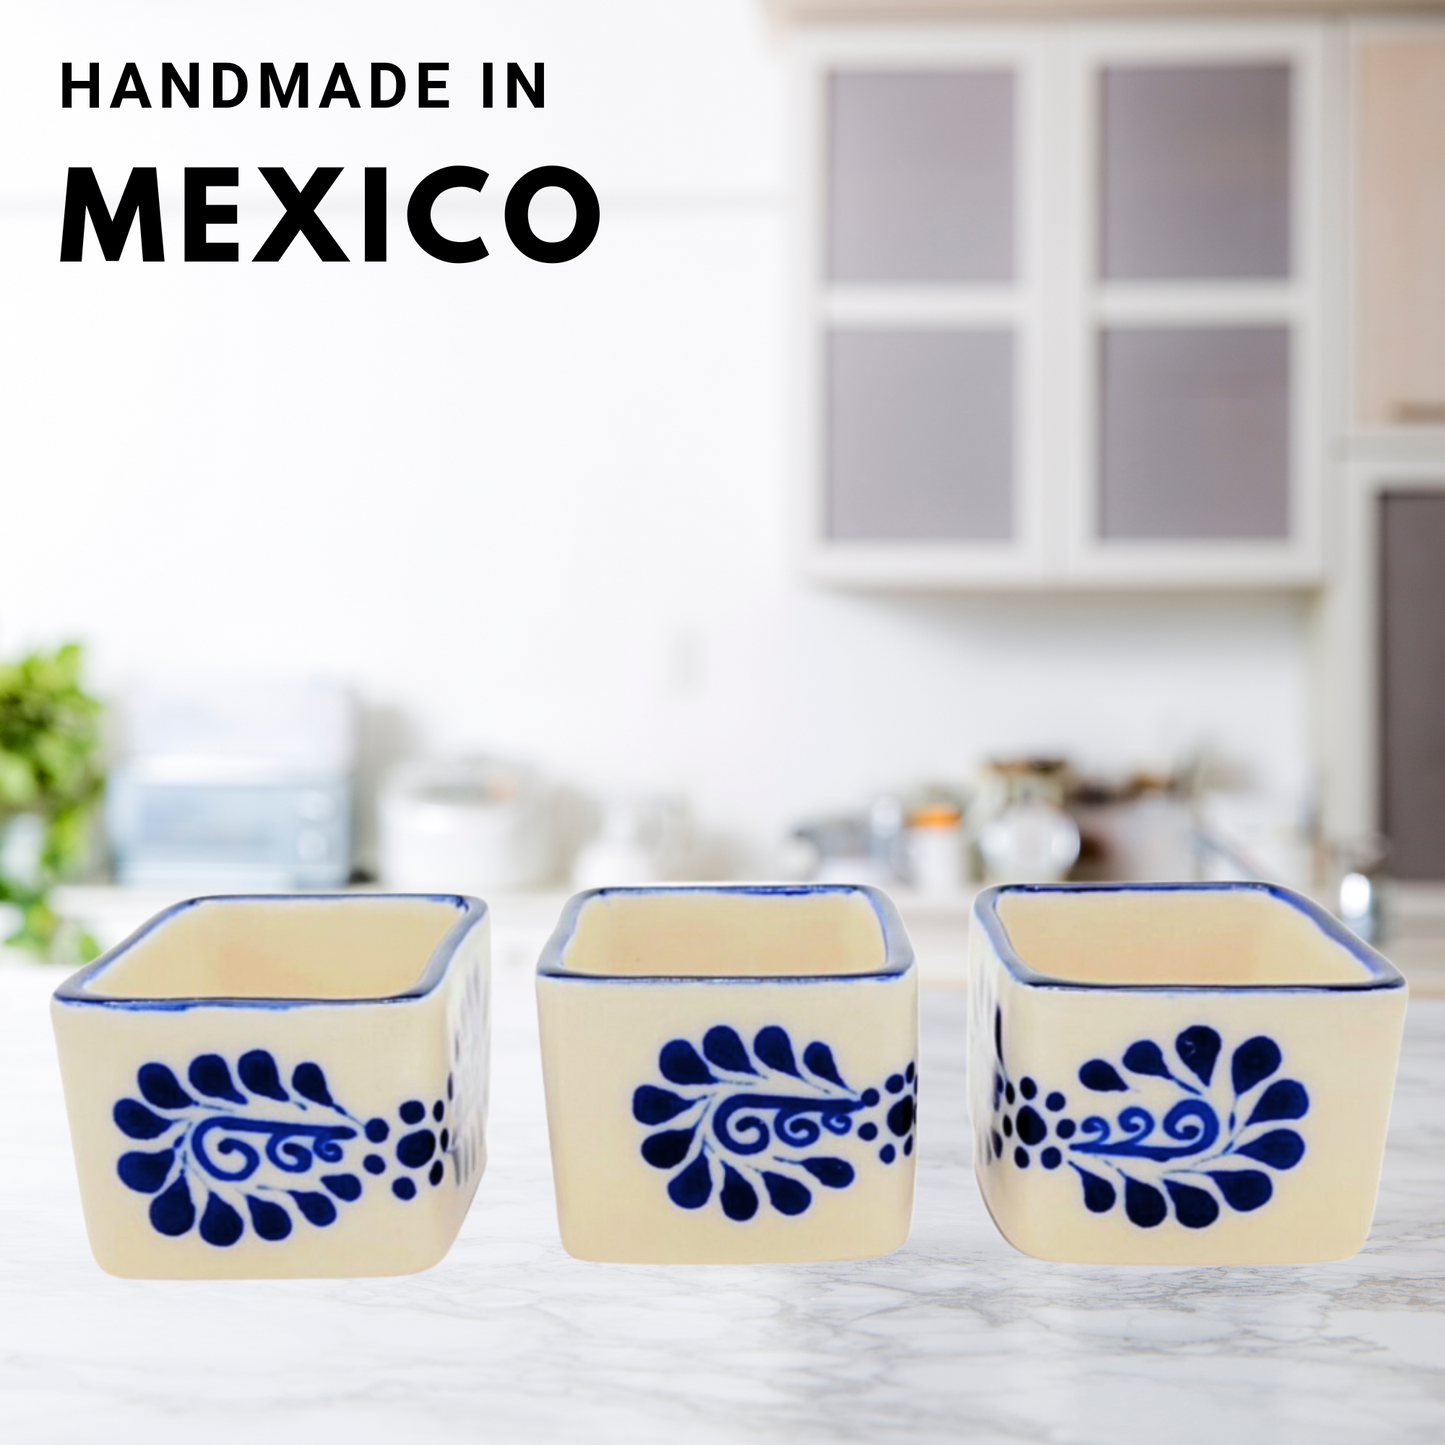 A set of 3 vibrant Talavera salsa and spices bowls, handmade and hand-painted in Mexico, perfect for a variety of condiments.